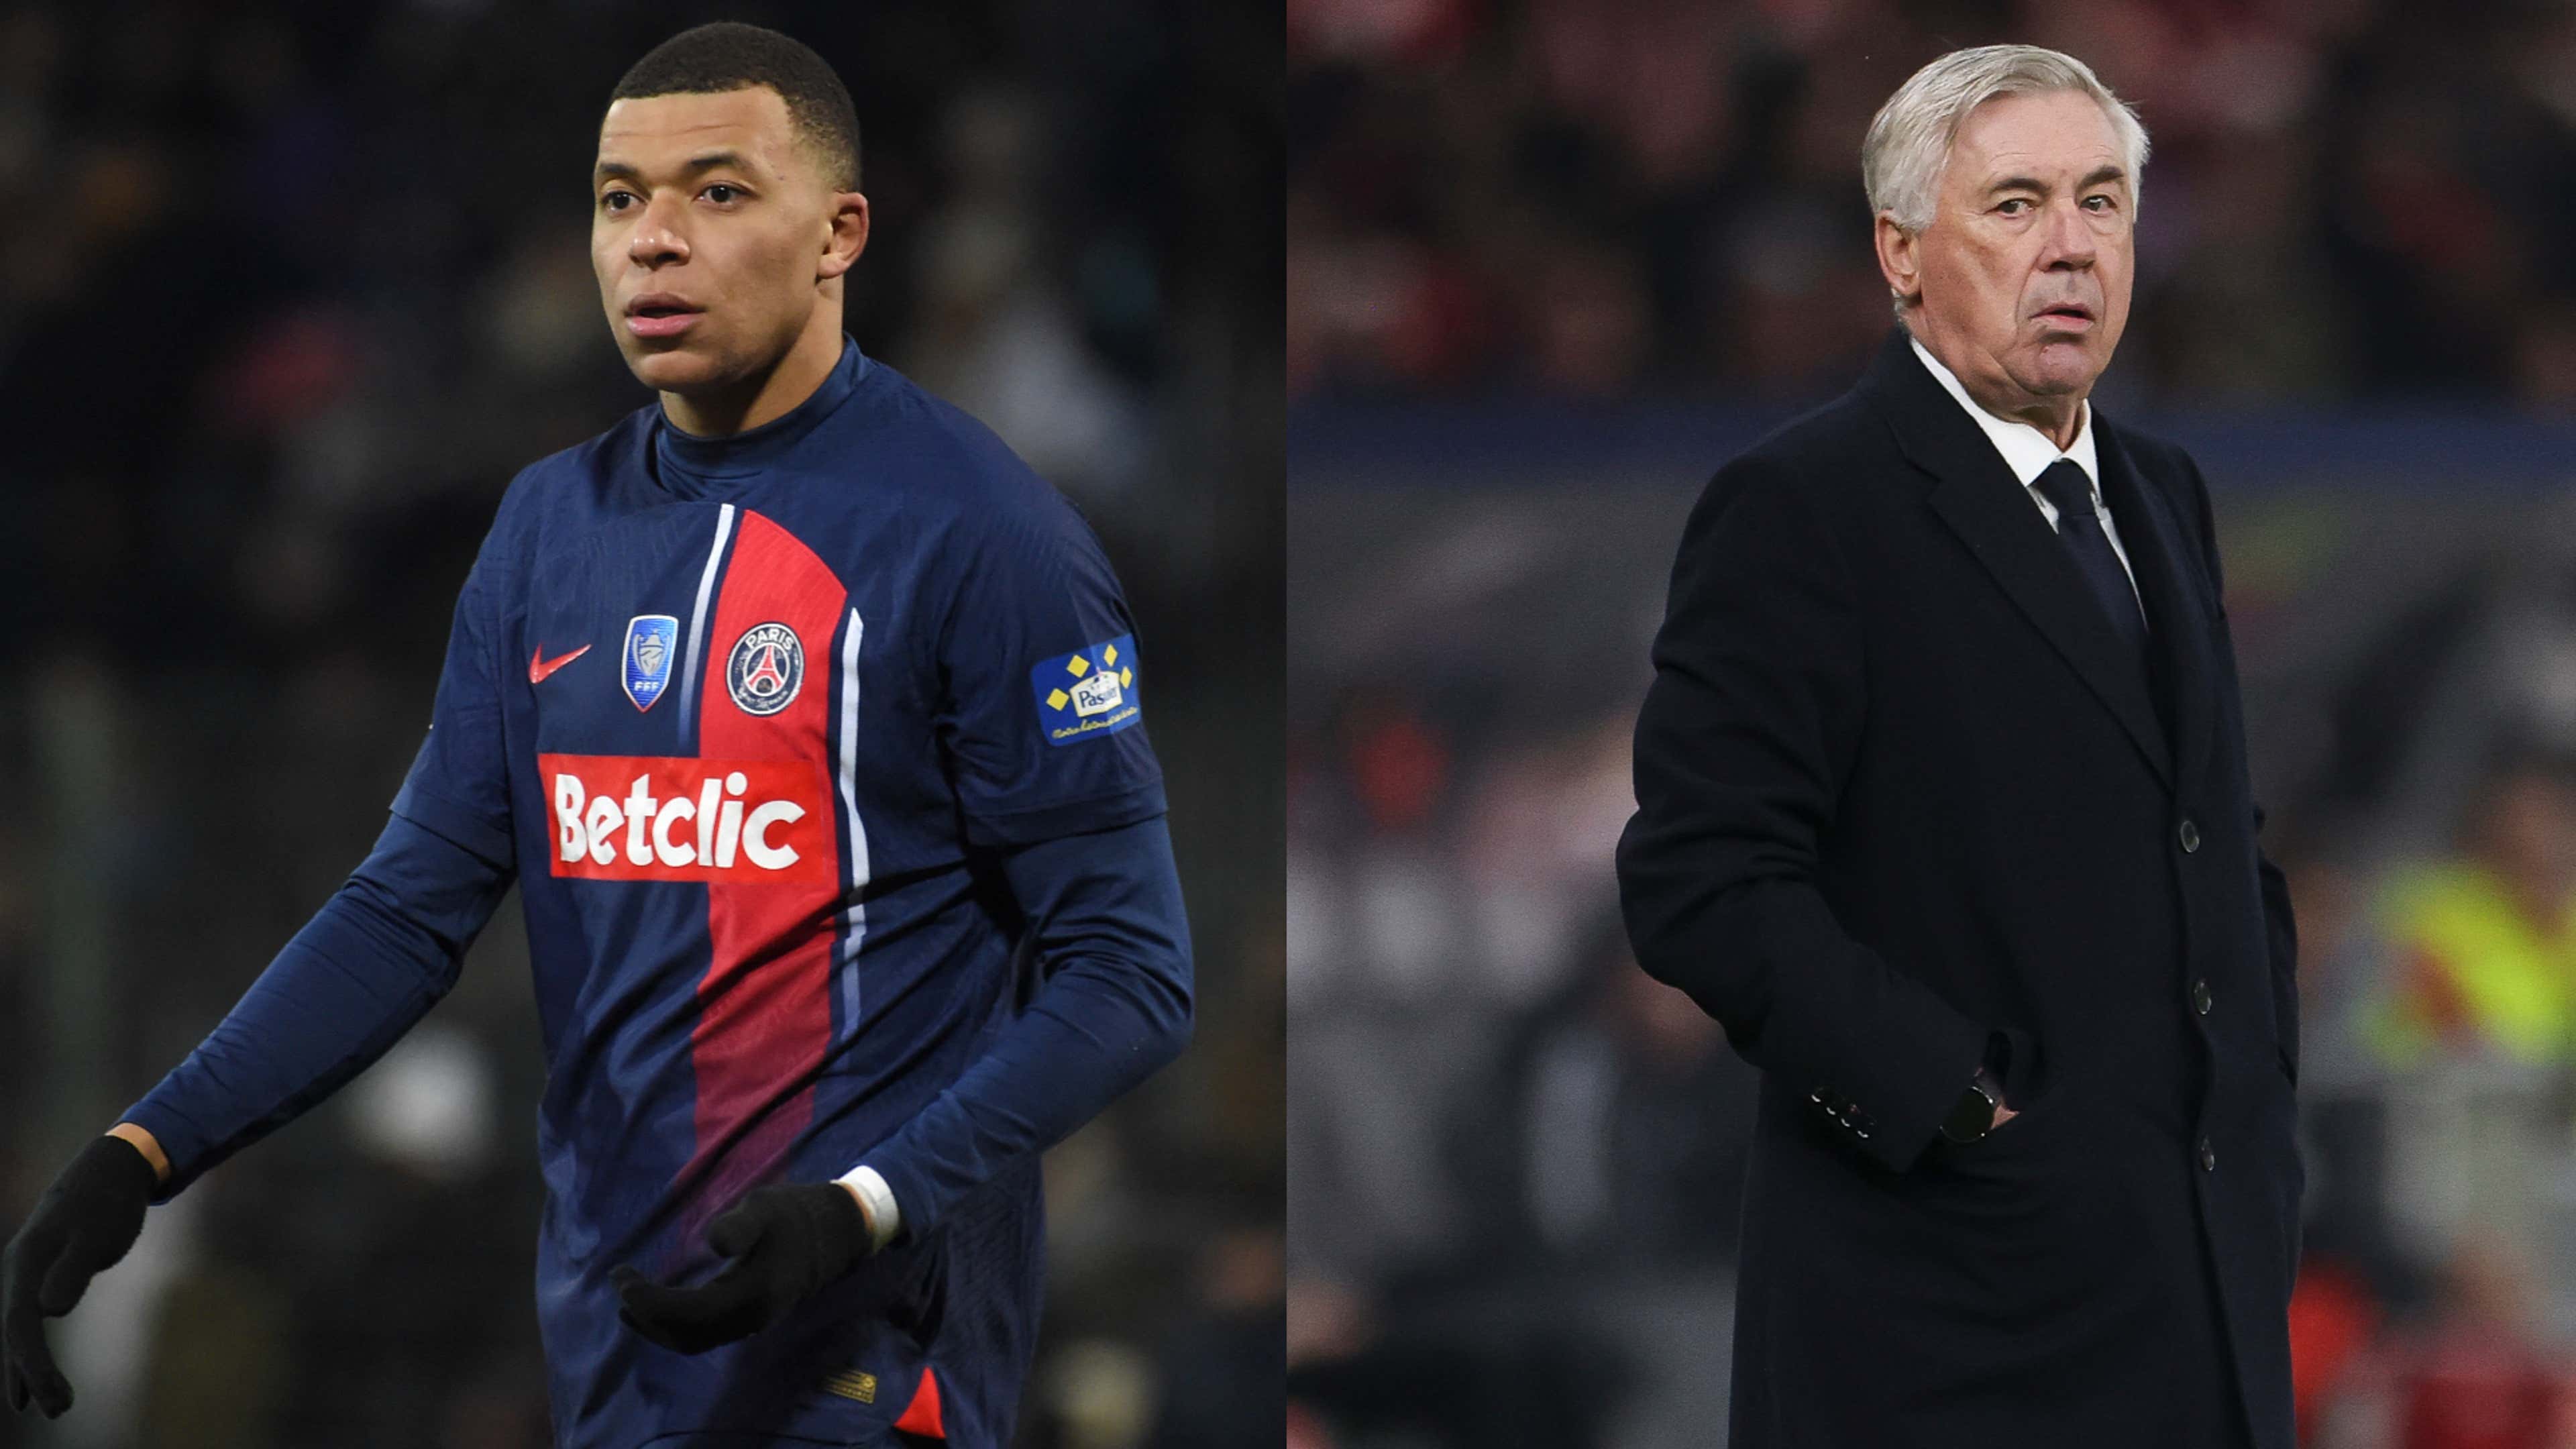 Another Kylian Mbappe twist! PSG superstar could have to take massive pay  cut to join Real Madrid as PSG try desperately to keep him in France |  Goal.com